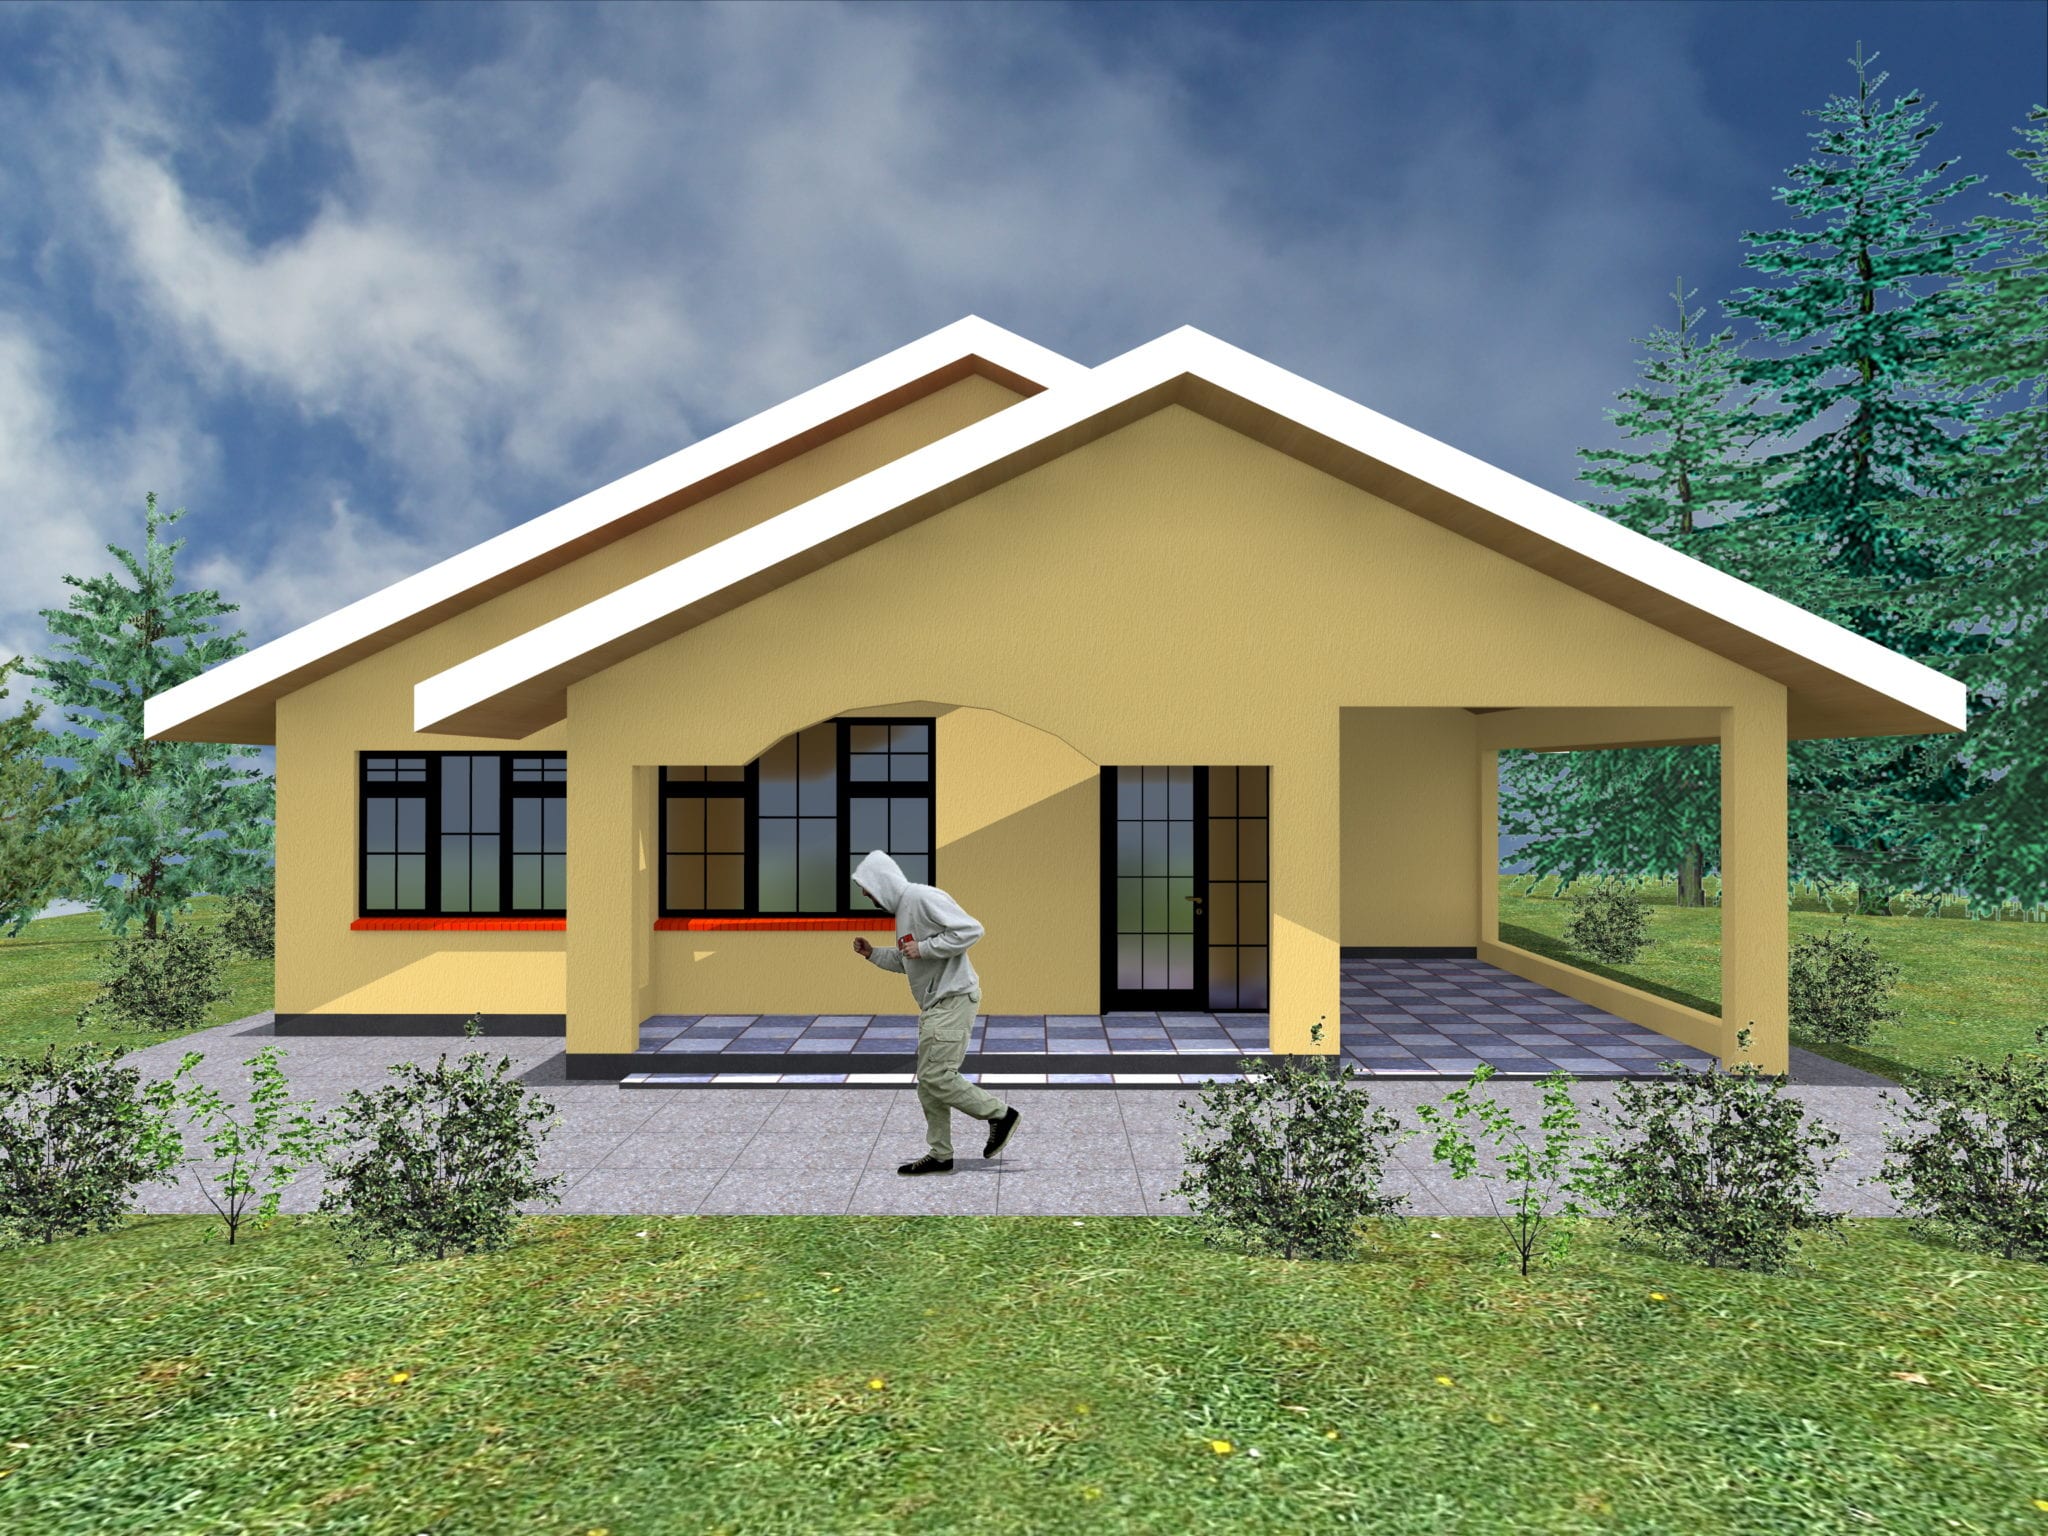 Simple 3 Bedroom House Plans With Garage, Small 3 Bedroom House Plans With Garage